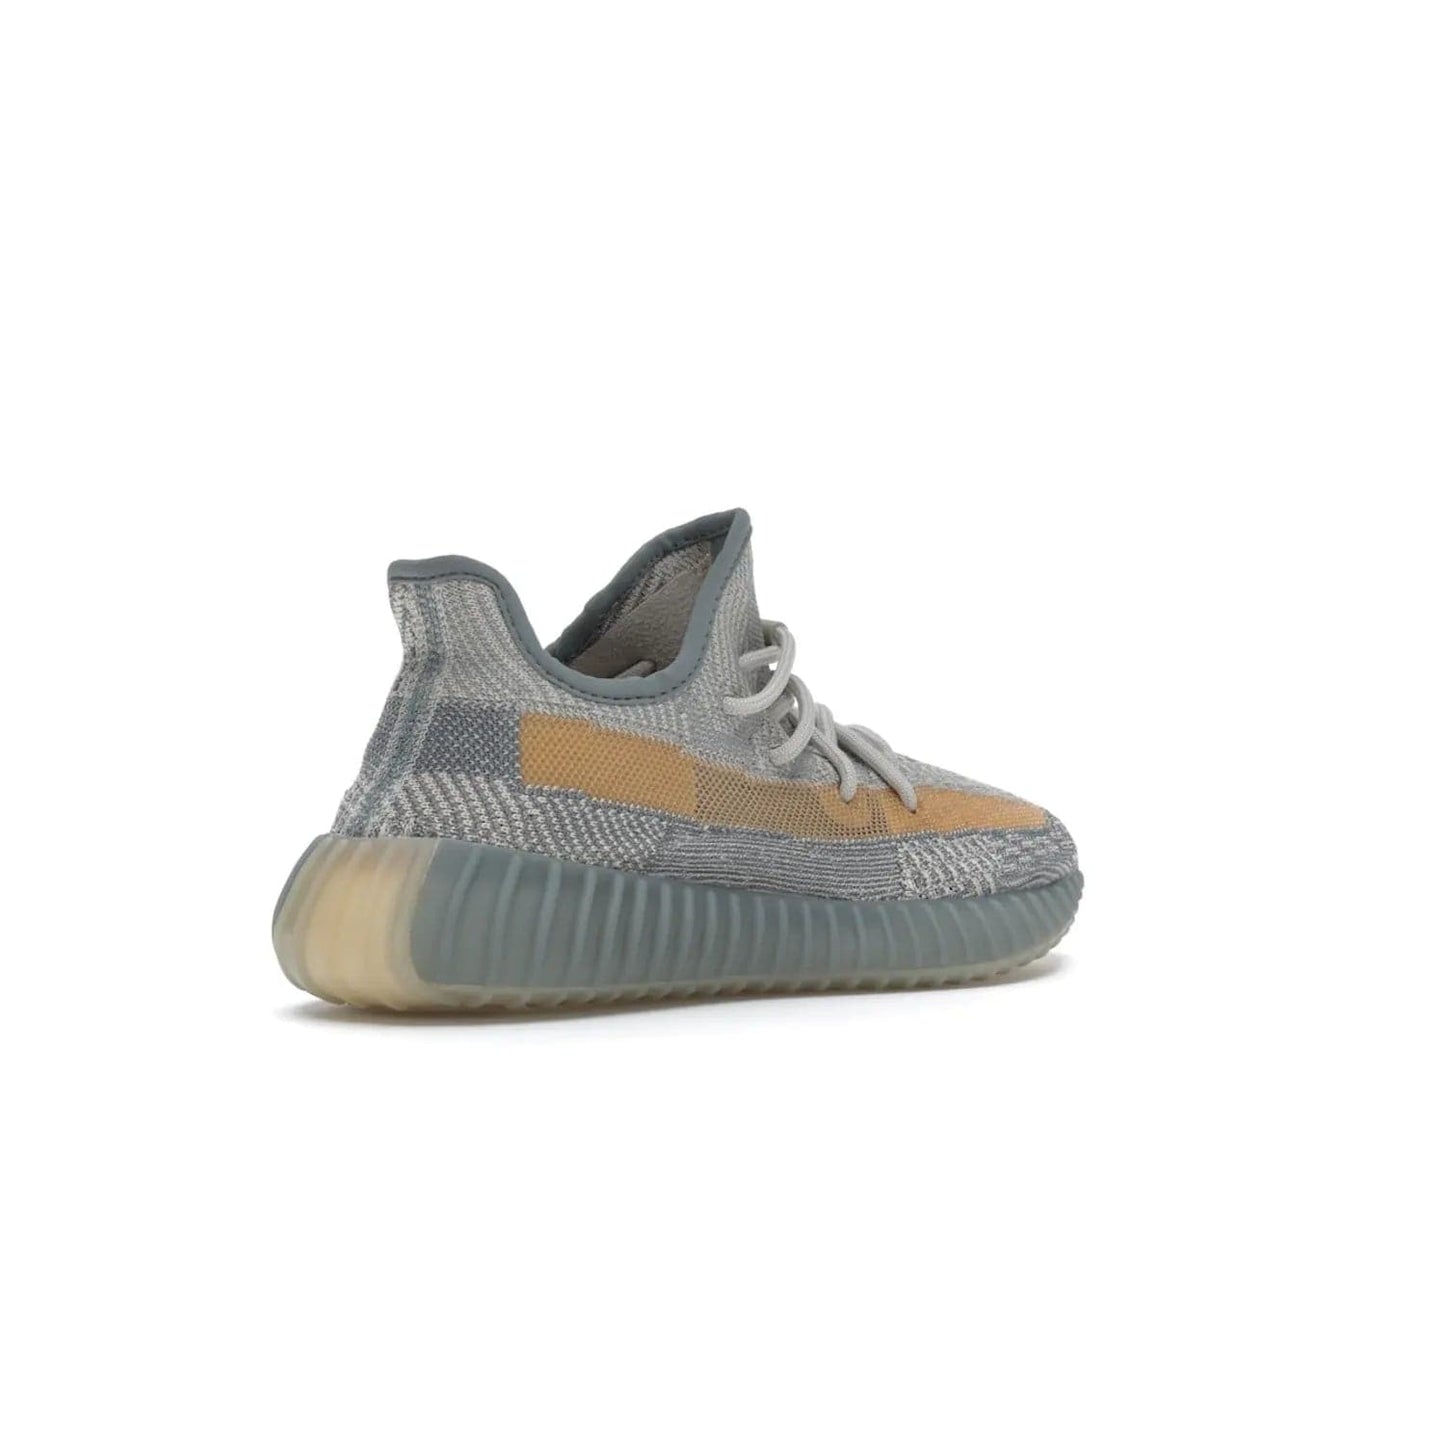 adidas Yeezy Boost 350 V2 Israfil - Image 33 - Only at www.BallersClubKickz.com - The adidas Yeezy Boost 350 V2 Israfil provides a unique style with a triple colorway and multi-colored threads. Featuring BOOST cushioning in a translucent midsole, this must-have sneaker drops in August 2020.